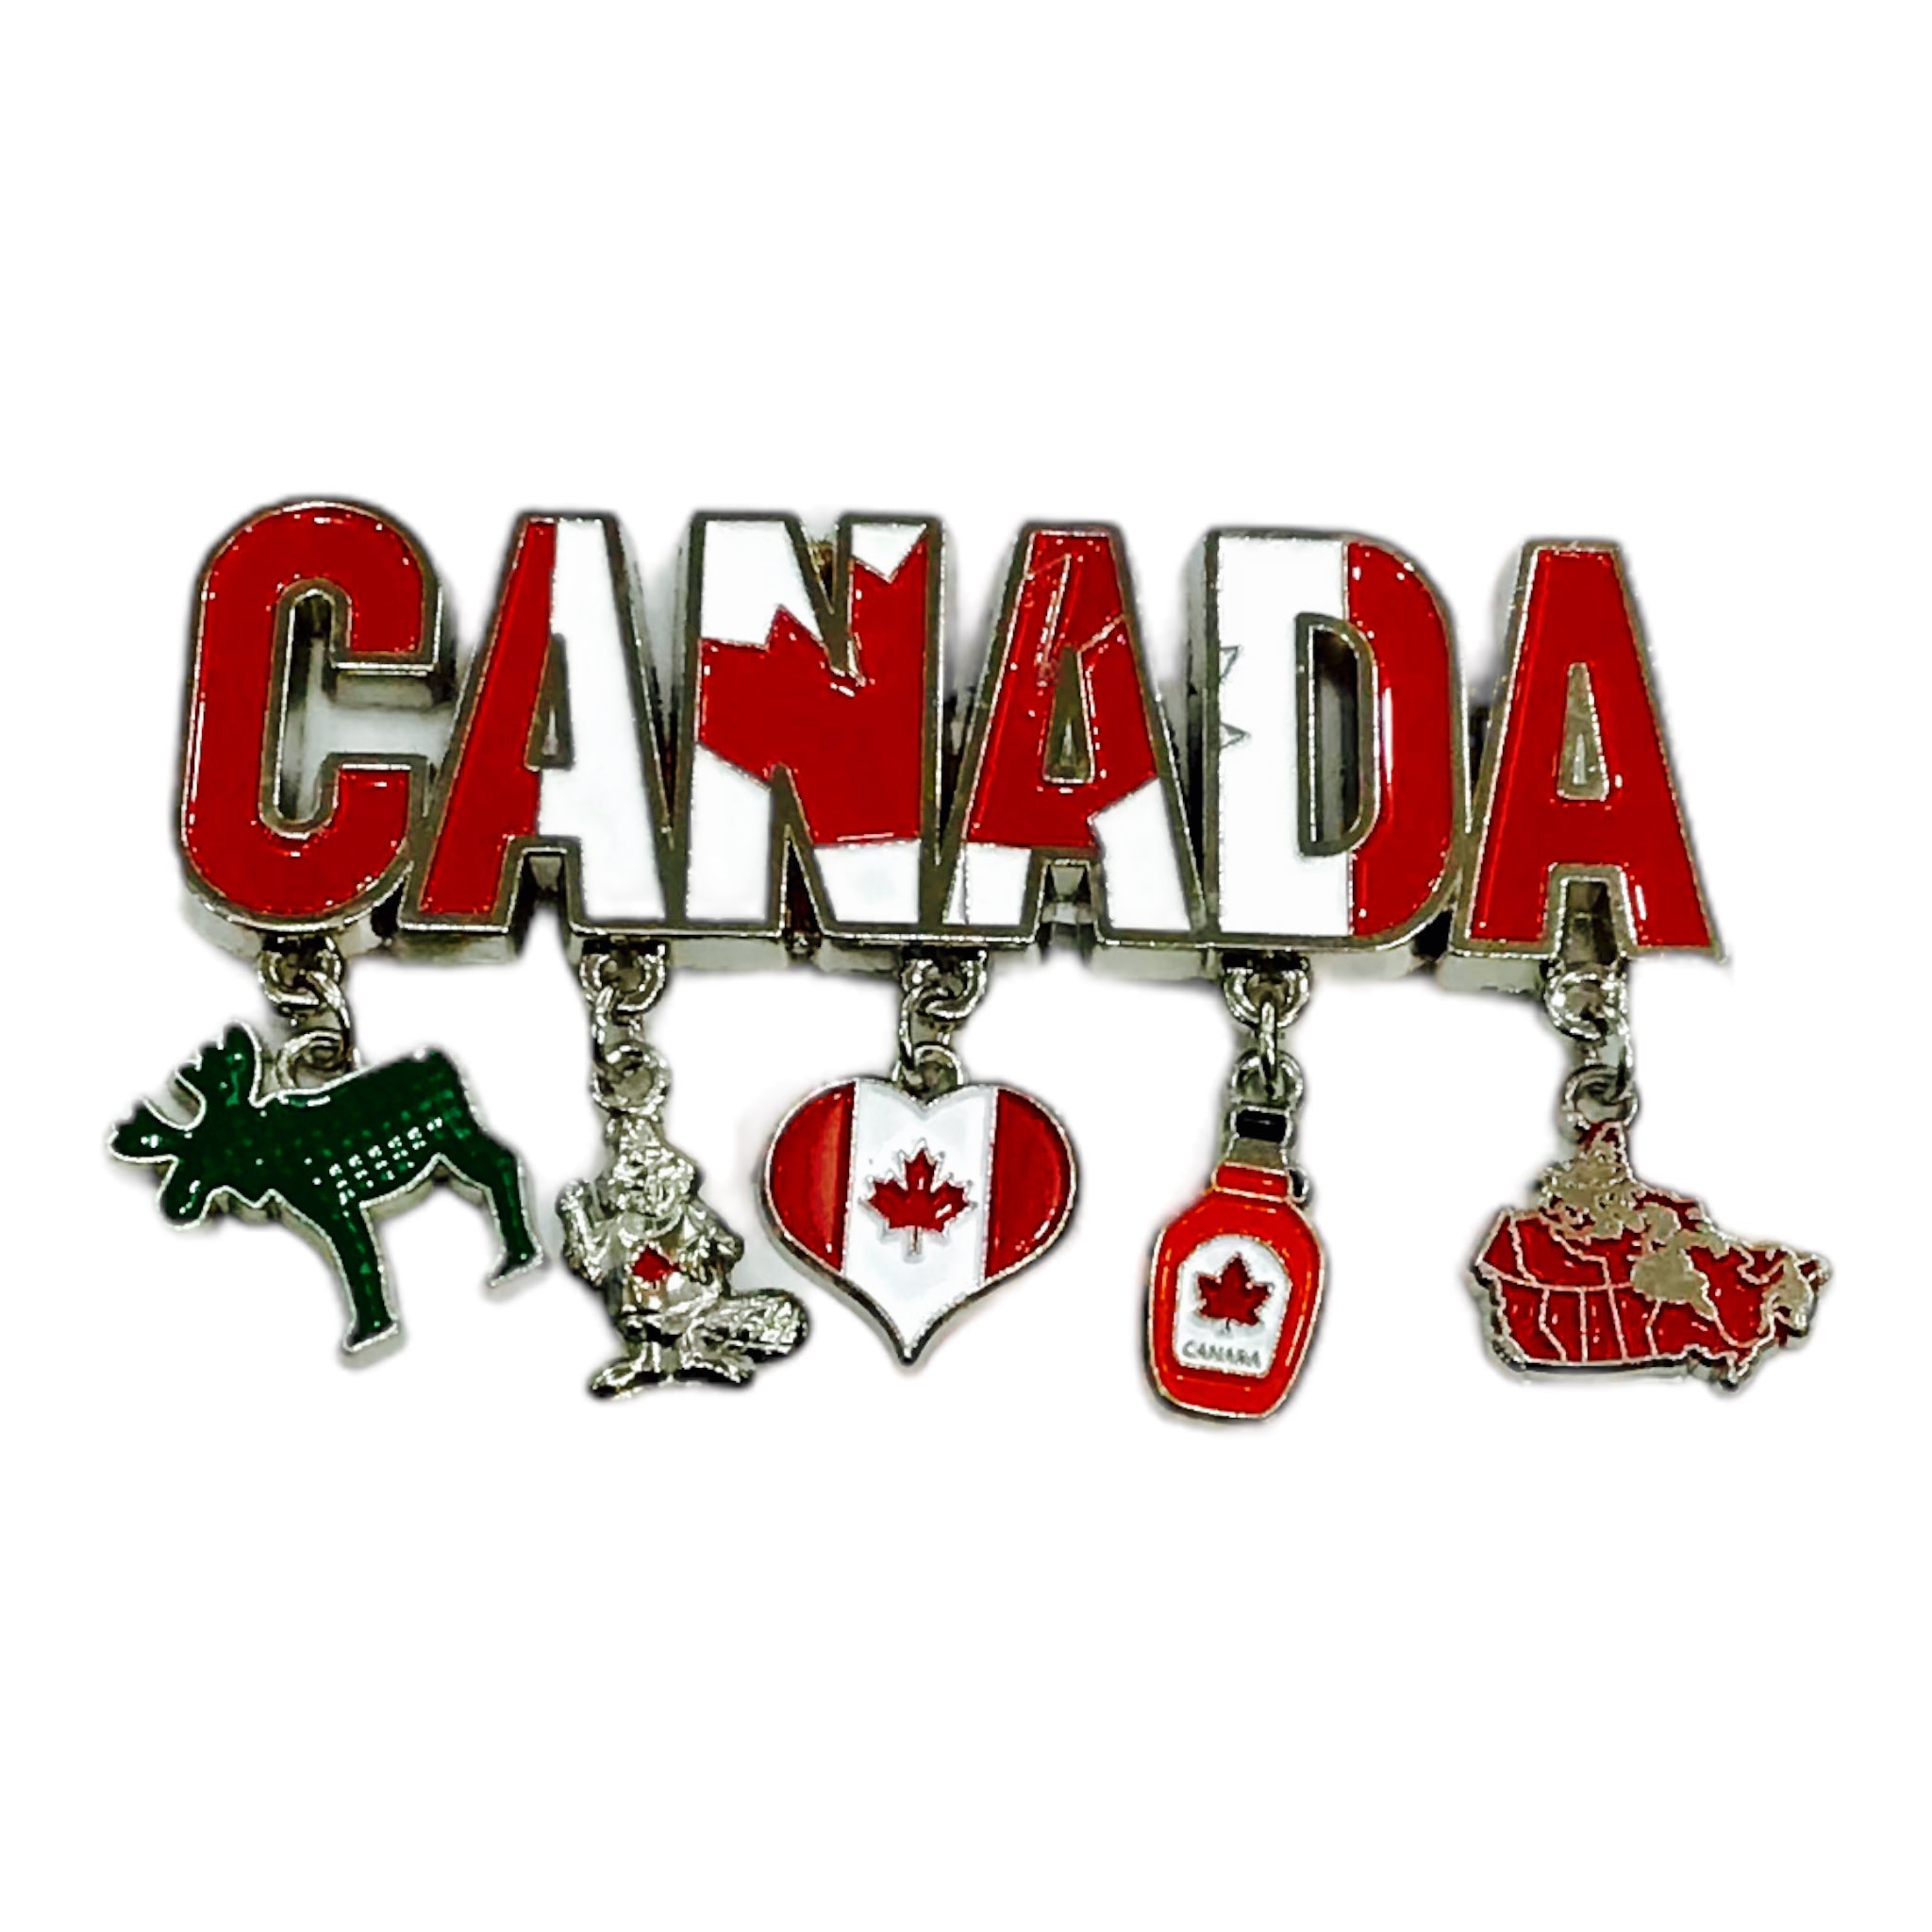 CANADA MAGNET WITH 5 CANADIAN CHARMS